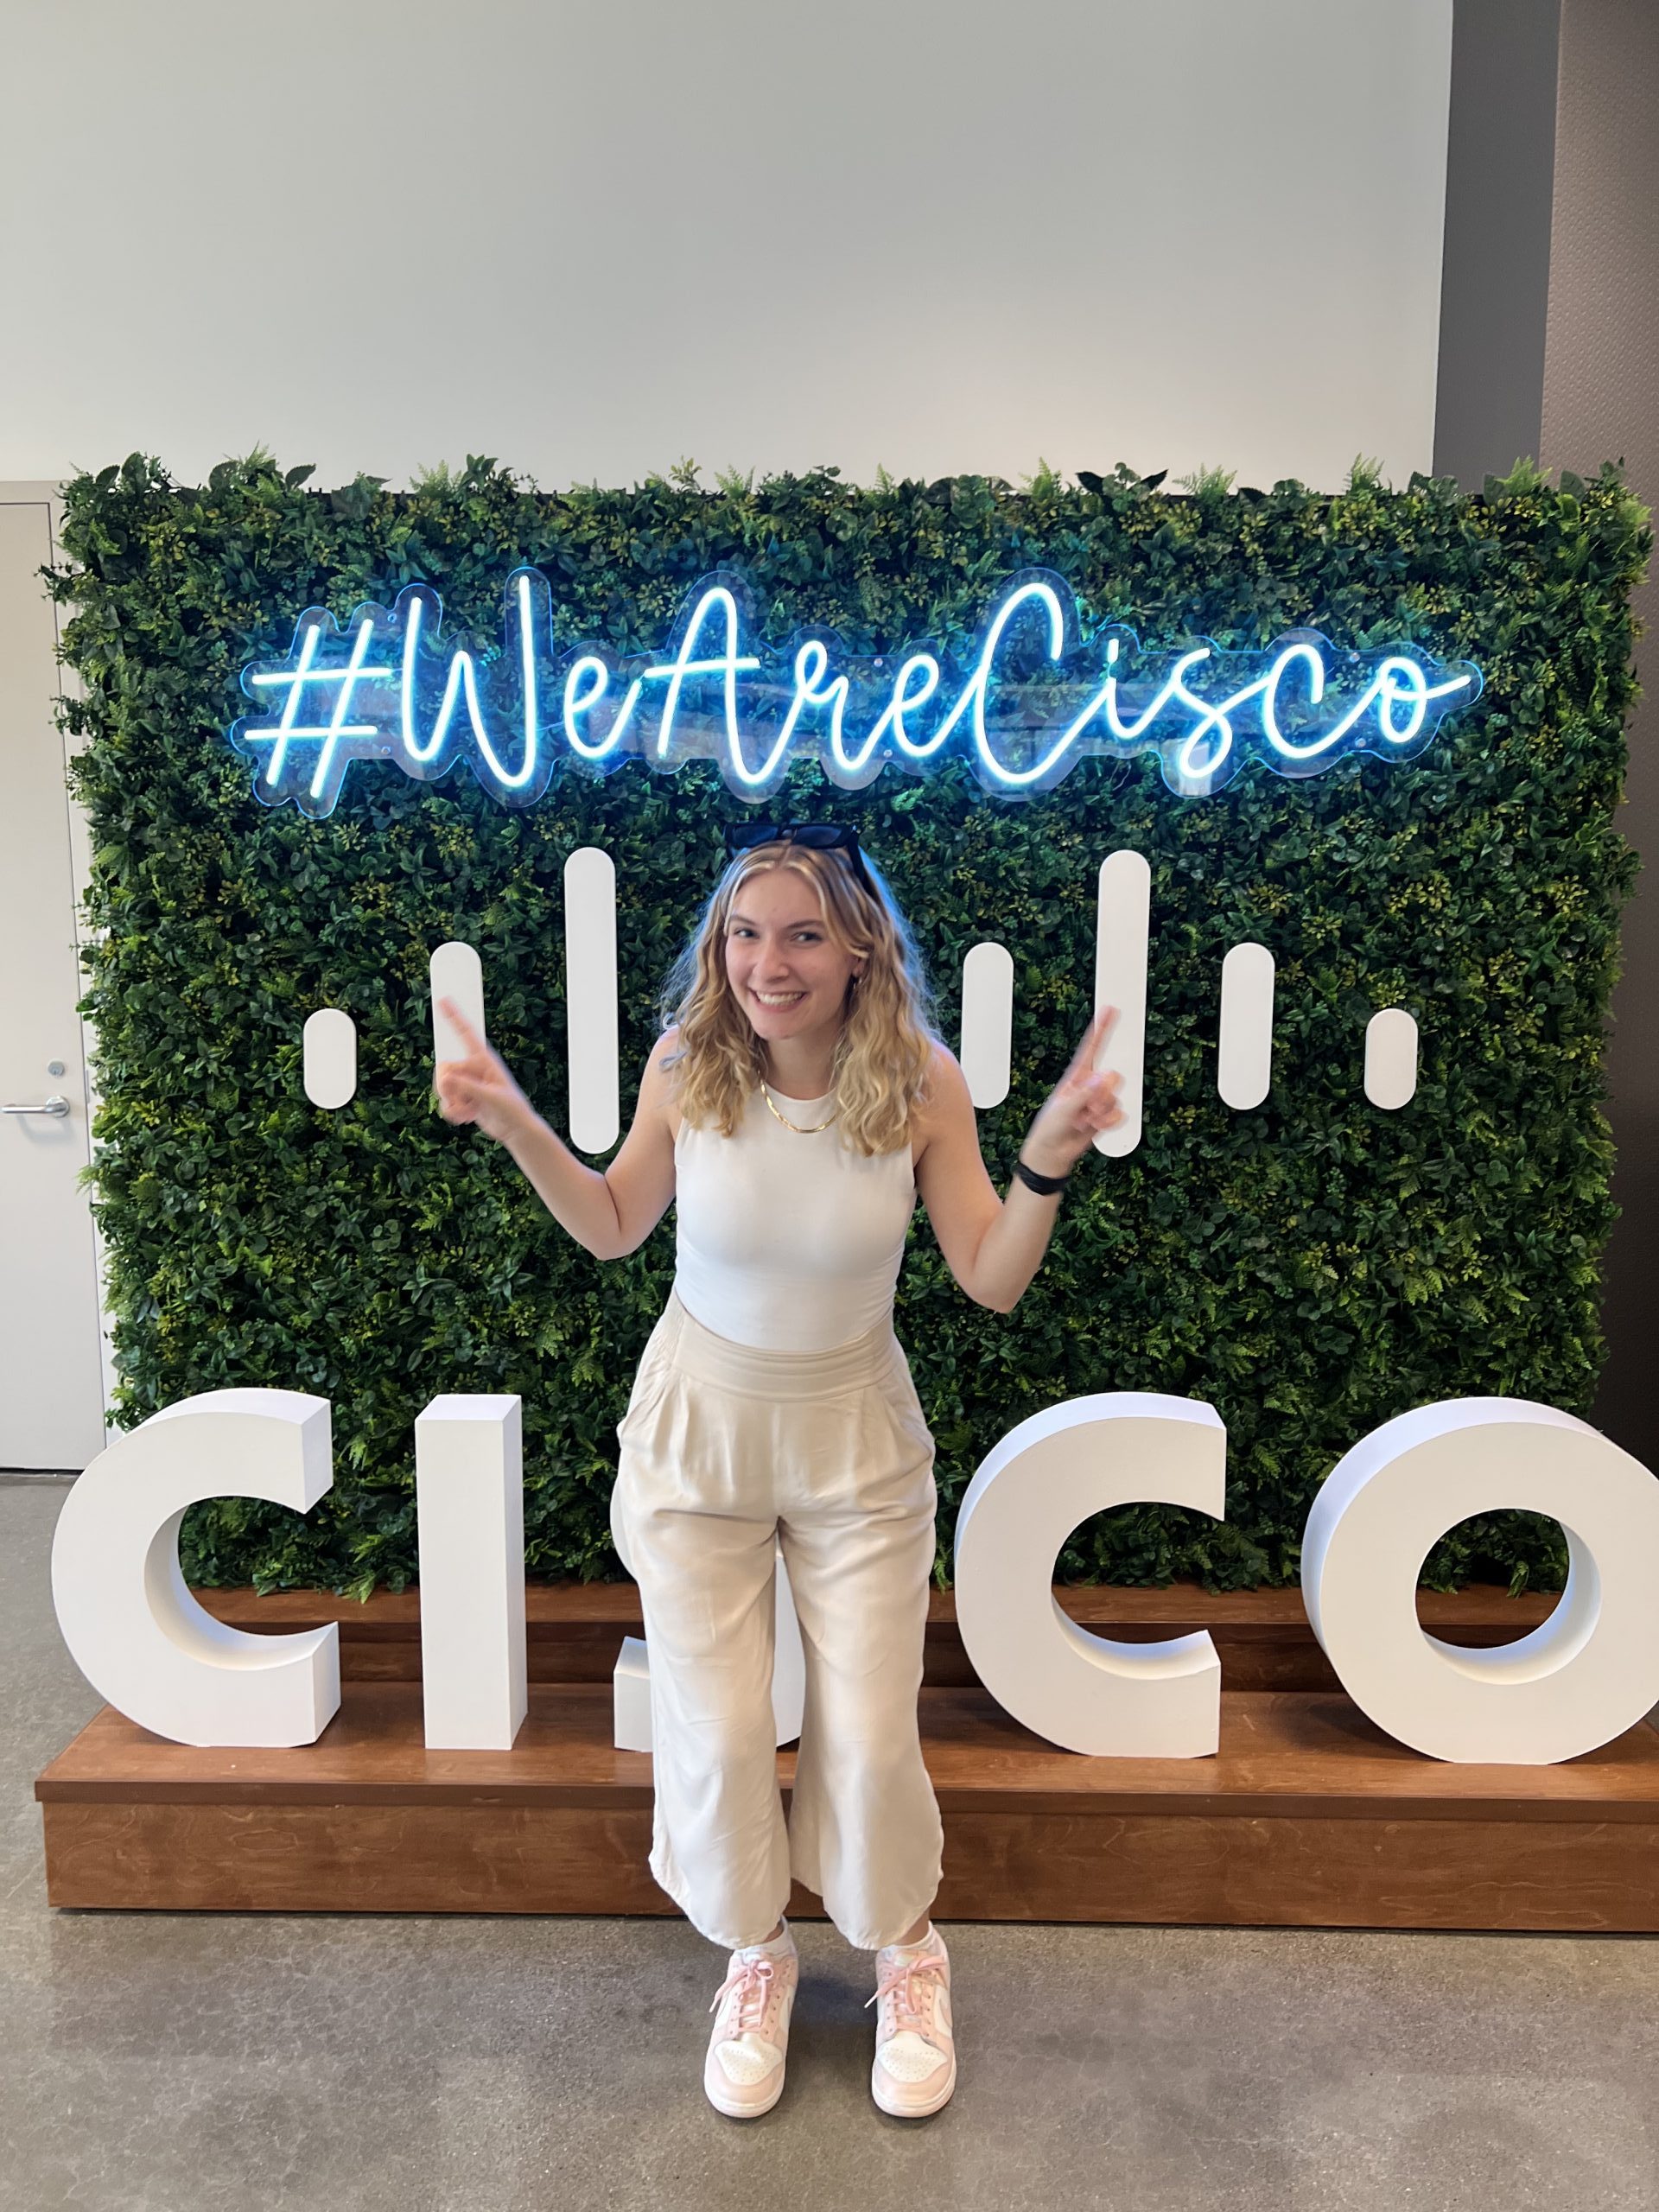 Young blond woman standing in front of neon #WeAreCisco sign with index fingers pointing up.